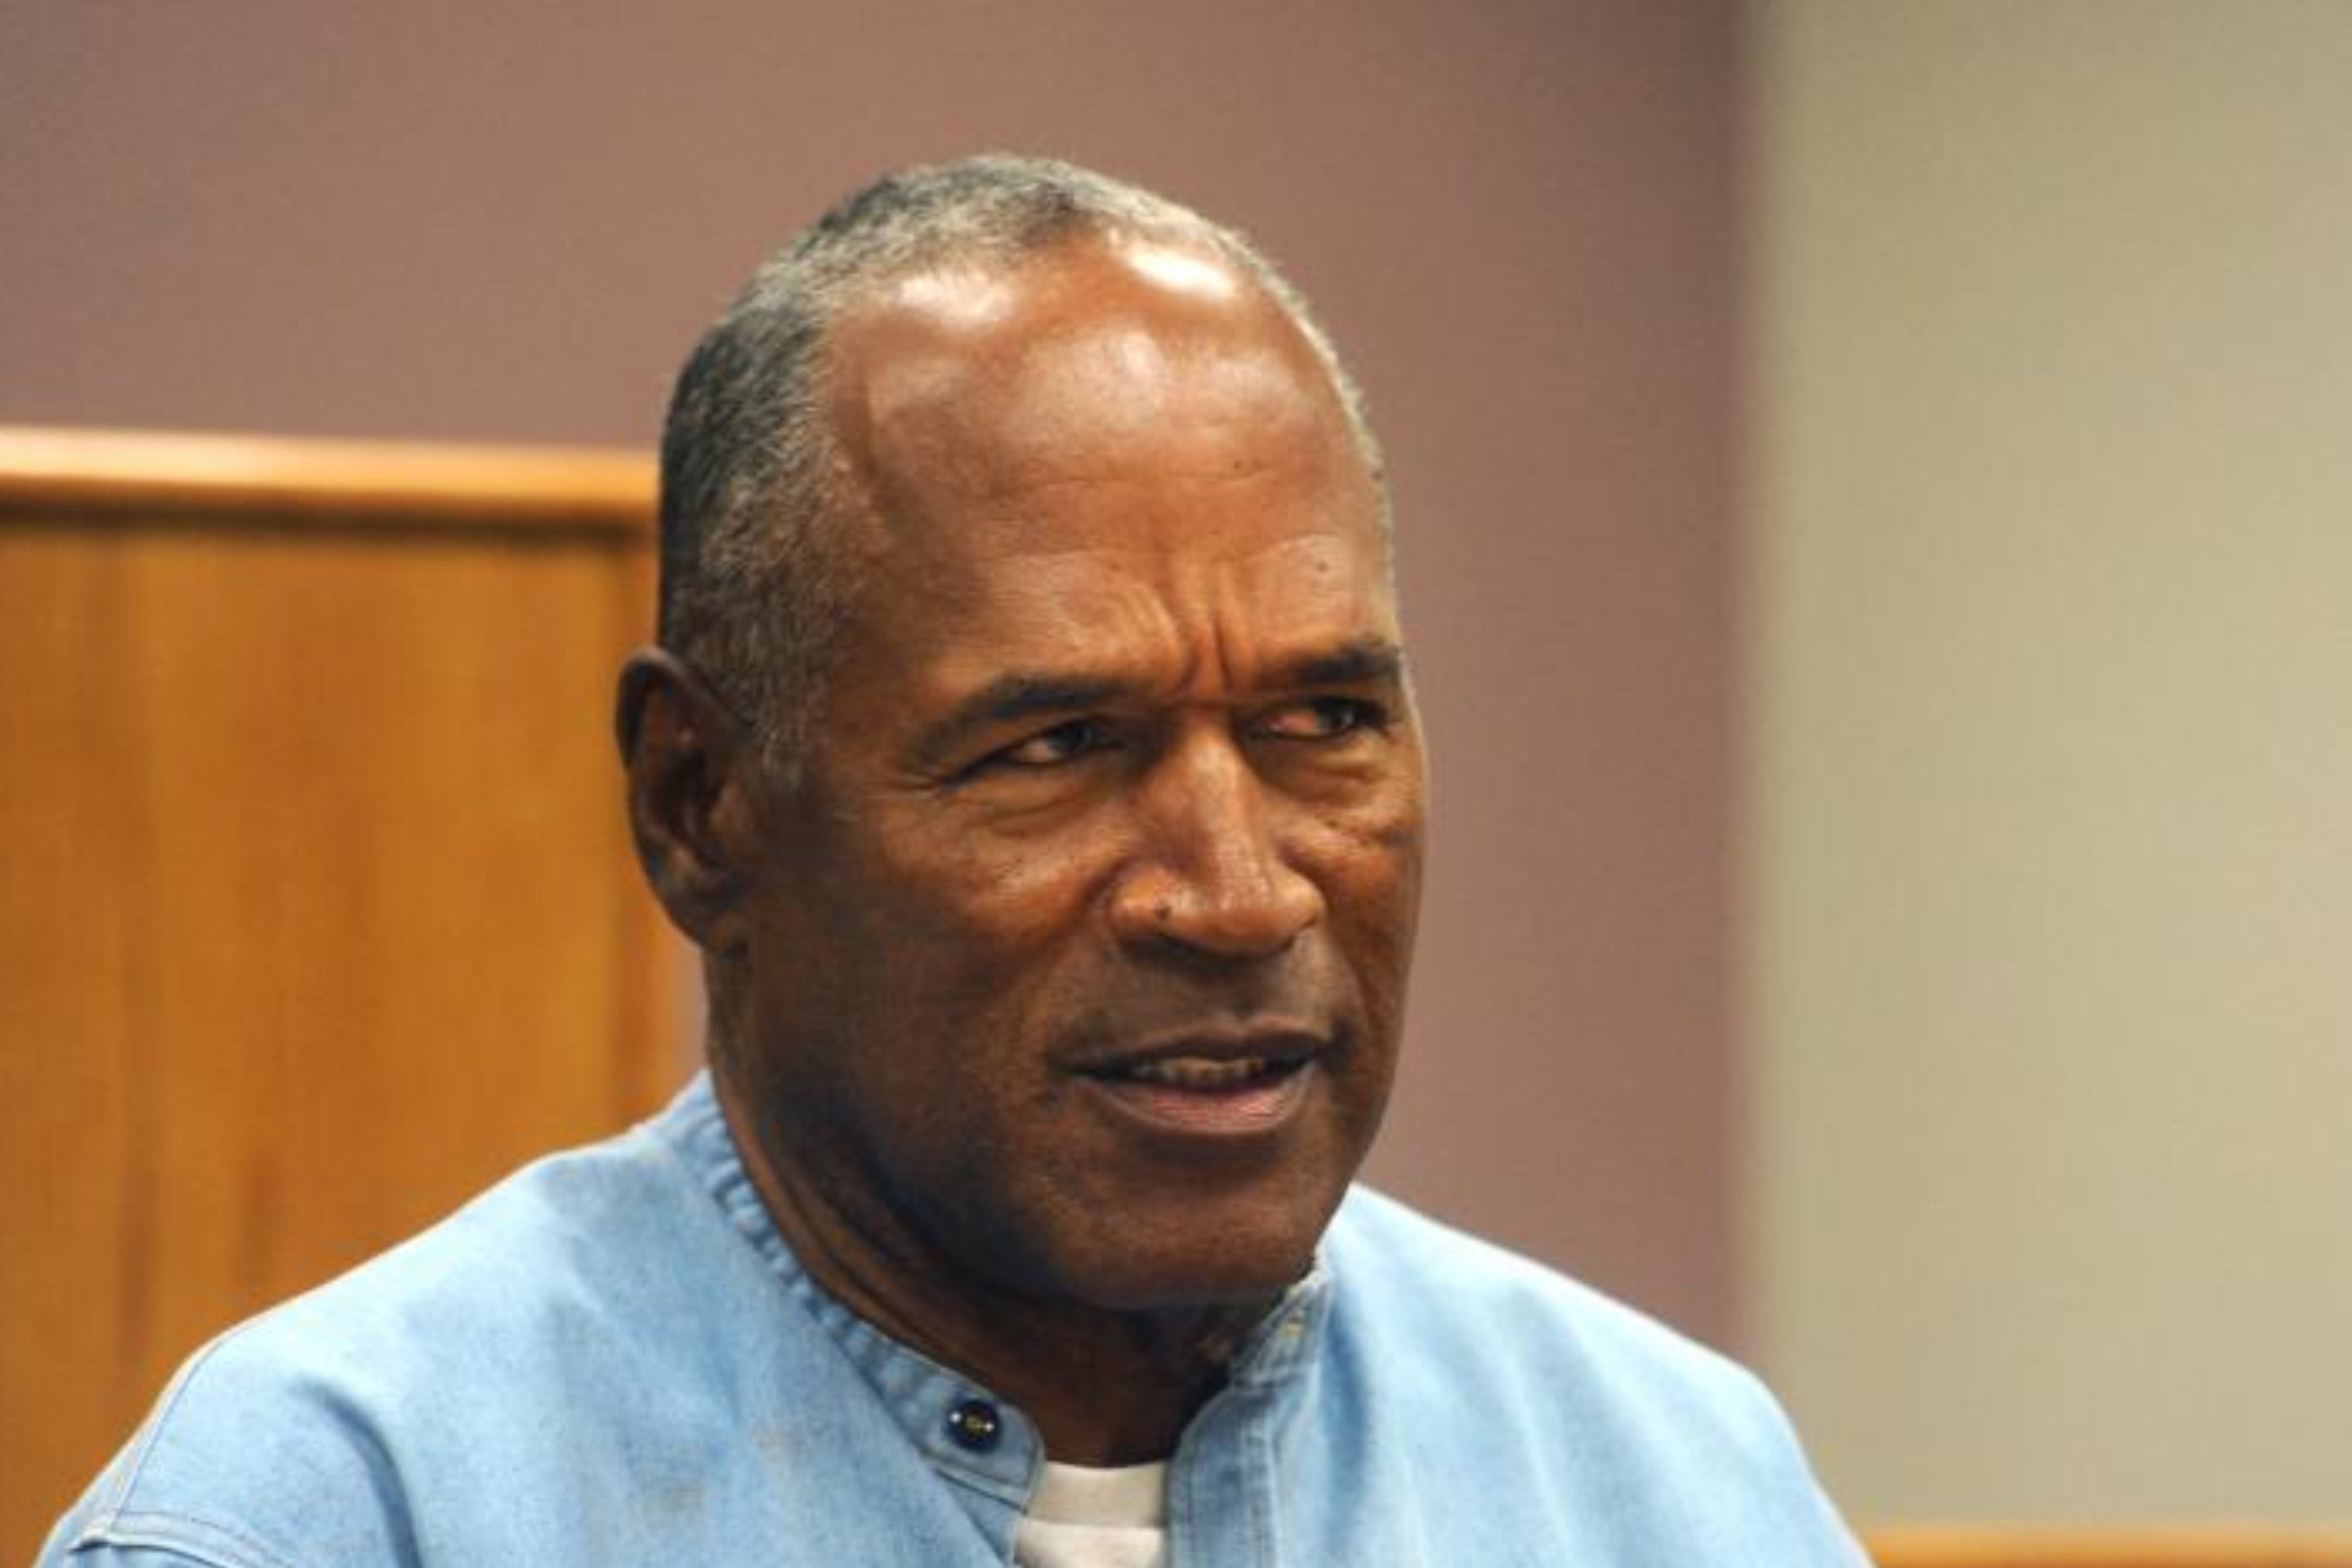 O.J. Simpson, former American soccer star acquitted in the 